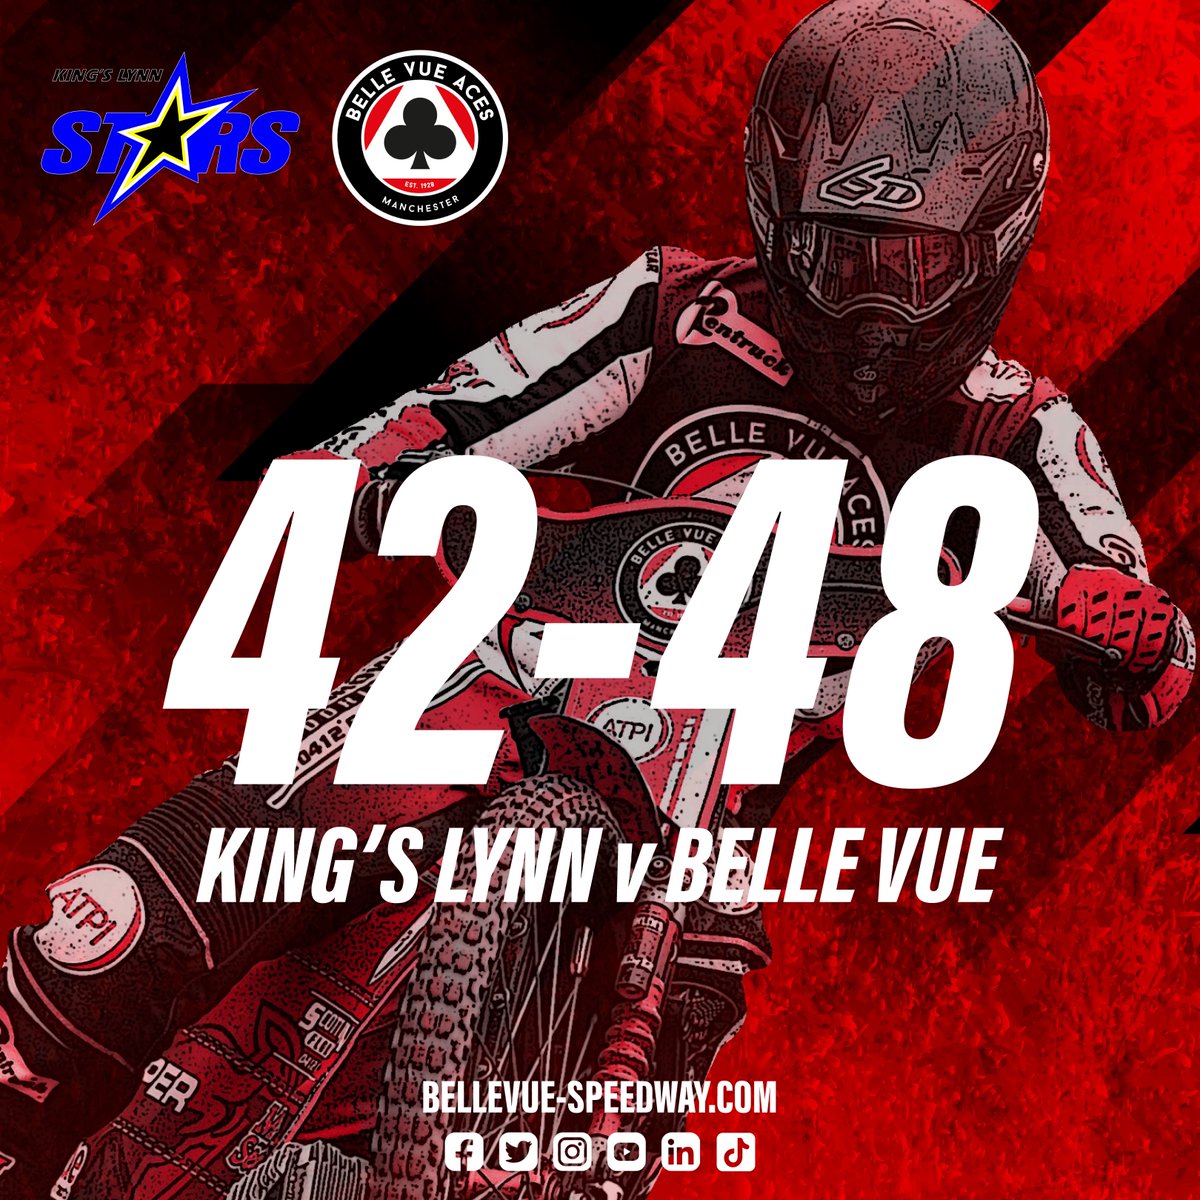 🔥 RESULT 🔥 A big result for the ATPI Aces at King's Lynn tonight! We take the win, the 2️⃣ league points and a 6️⃣-point lead into Monday's home match! Full report to follow... #FeelTheBuzz 🐝